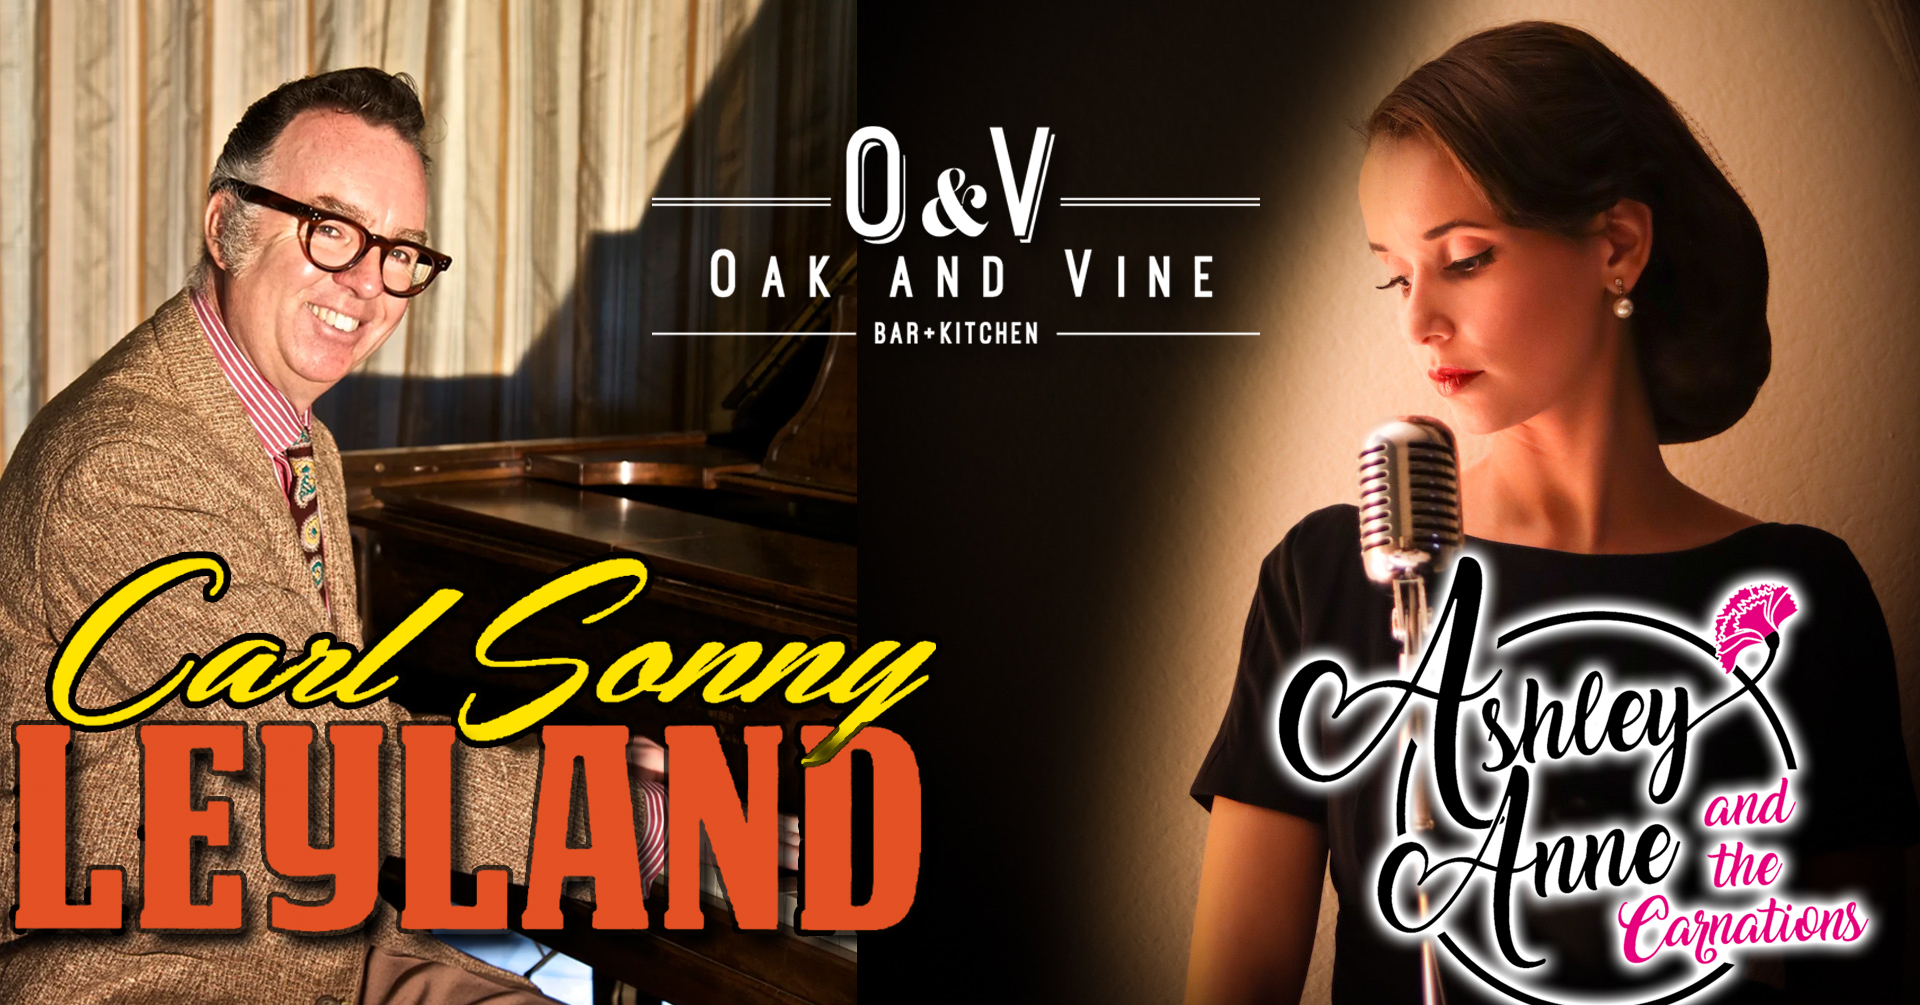 ASHLEY ANNE AND CARL SONNY LEYLAND AT THE OAK AND VINE IN GLENDALE!